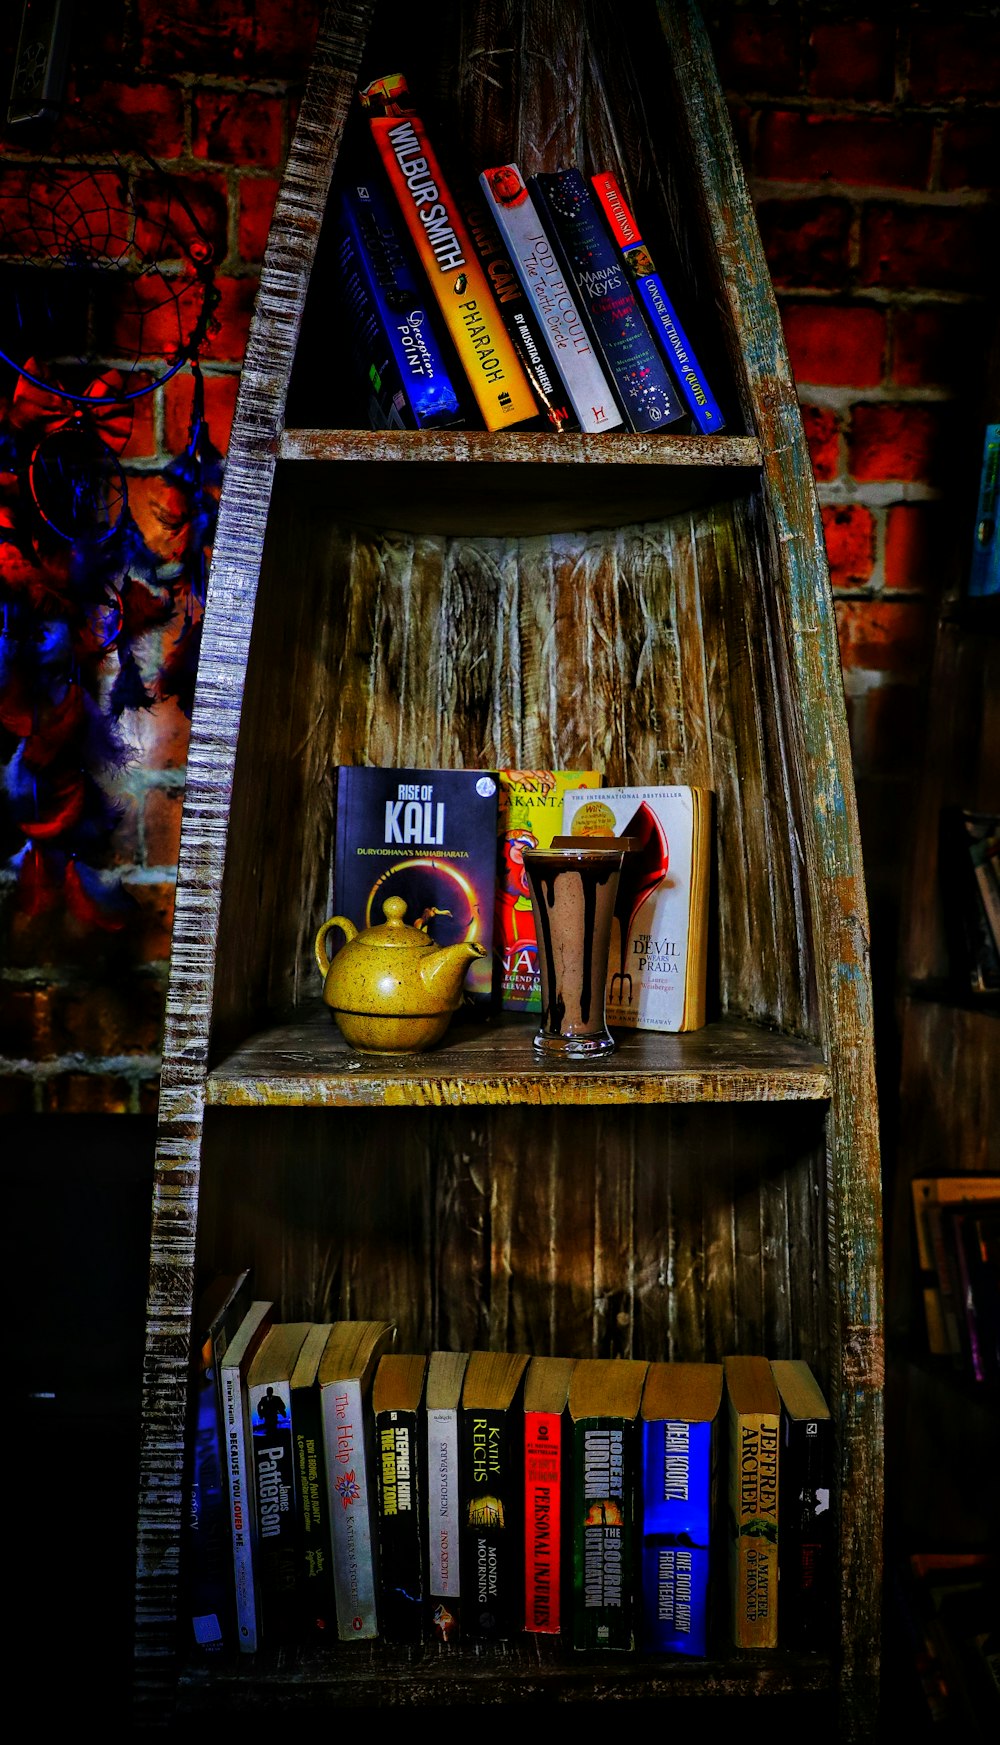 a bookshelf filled with books and a yellow vase